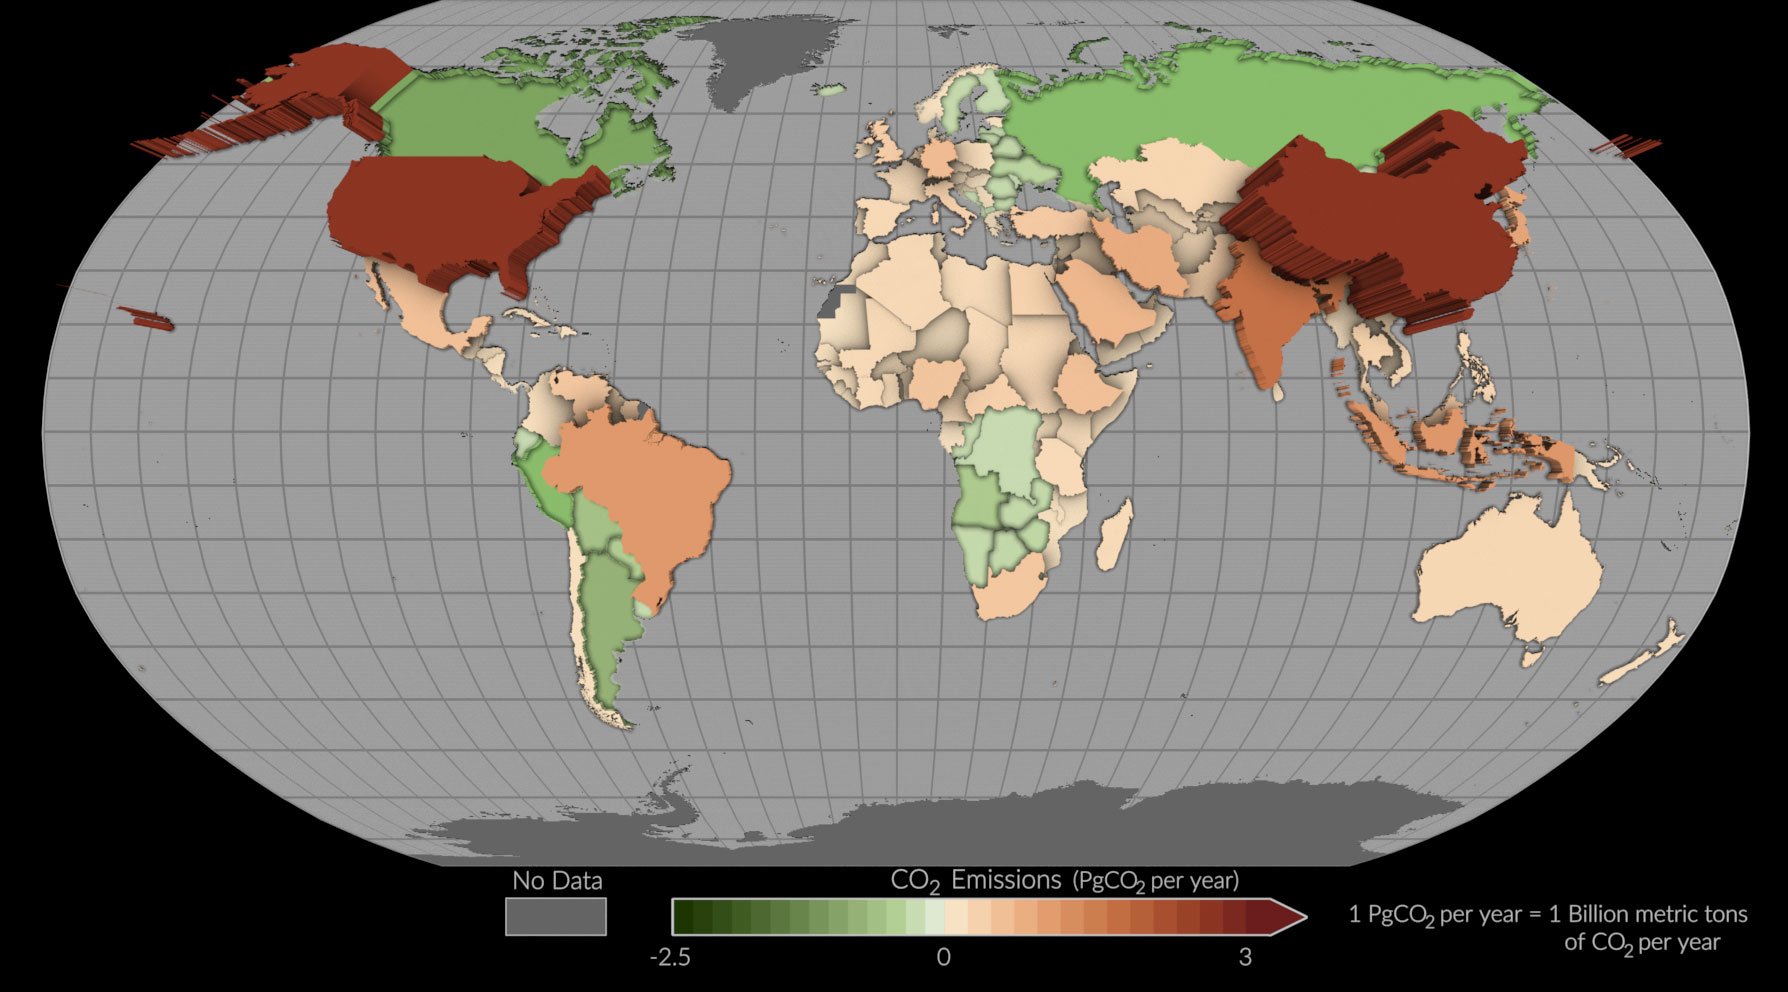 This map shows mean net emissions and removals of carbon dioxide from 2015 to 2020 using estimates informed by NASA’s OCO-2 satellite measurements.